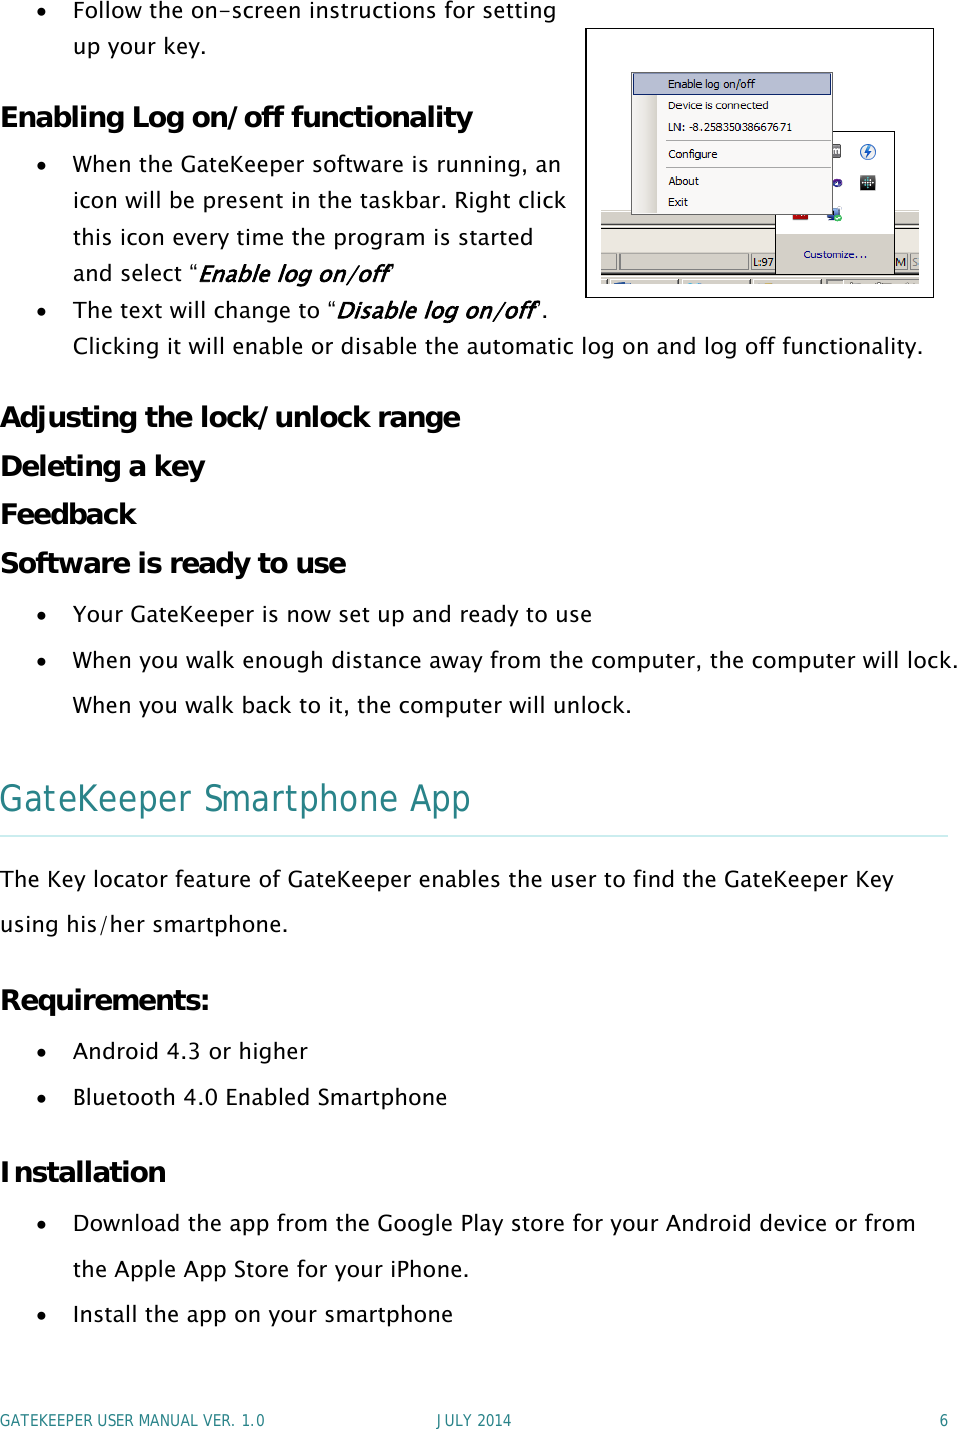 GATEKEEPER USER MANUAL VER. 1.0 JULY 2014 6Follow the on-screen instructions for settingup your key.Enabling Log on/off functionalityWhen the GateKeeper software is running, anicon will be present in the taskbar. Right clickthis icon every time the program is startedand select “Enable log on/off”Thetextwillchangeto“Disable log on/off”.Clicking it will enable or disable the automatic log on and log off functionality.Adjusting the lock/unlock rangeDeleting a keyFeedbackSoftware is ready to useYour GateKeeper is now set up and ready to useWhen you walk enough distance away from the computer, the computer will lock.When you walk back to it, the computer will unlock.GateKeeper Smartphone AppThe Key locator feature of GateKeeper enables the user to find the GateKeeper Keyusing his/her smartphone.Requirements:Android 4.3 or higherBluetooth 4.0 Enabled SmartphoneInstallationDownload the app from the Google Play store for your Android device or fromthe Apple App Store for your iPhone.Install the app on your smartphone